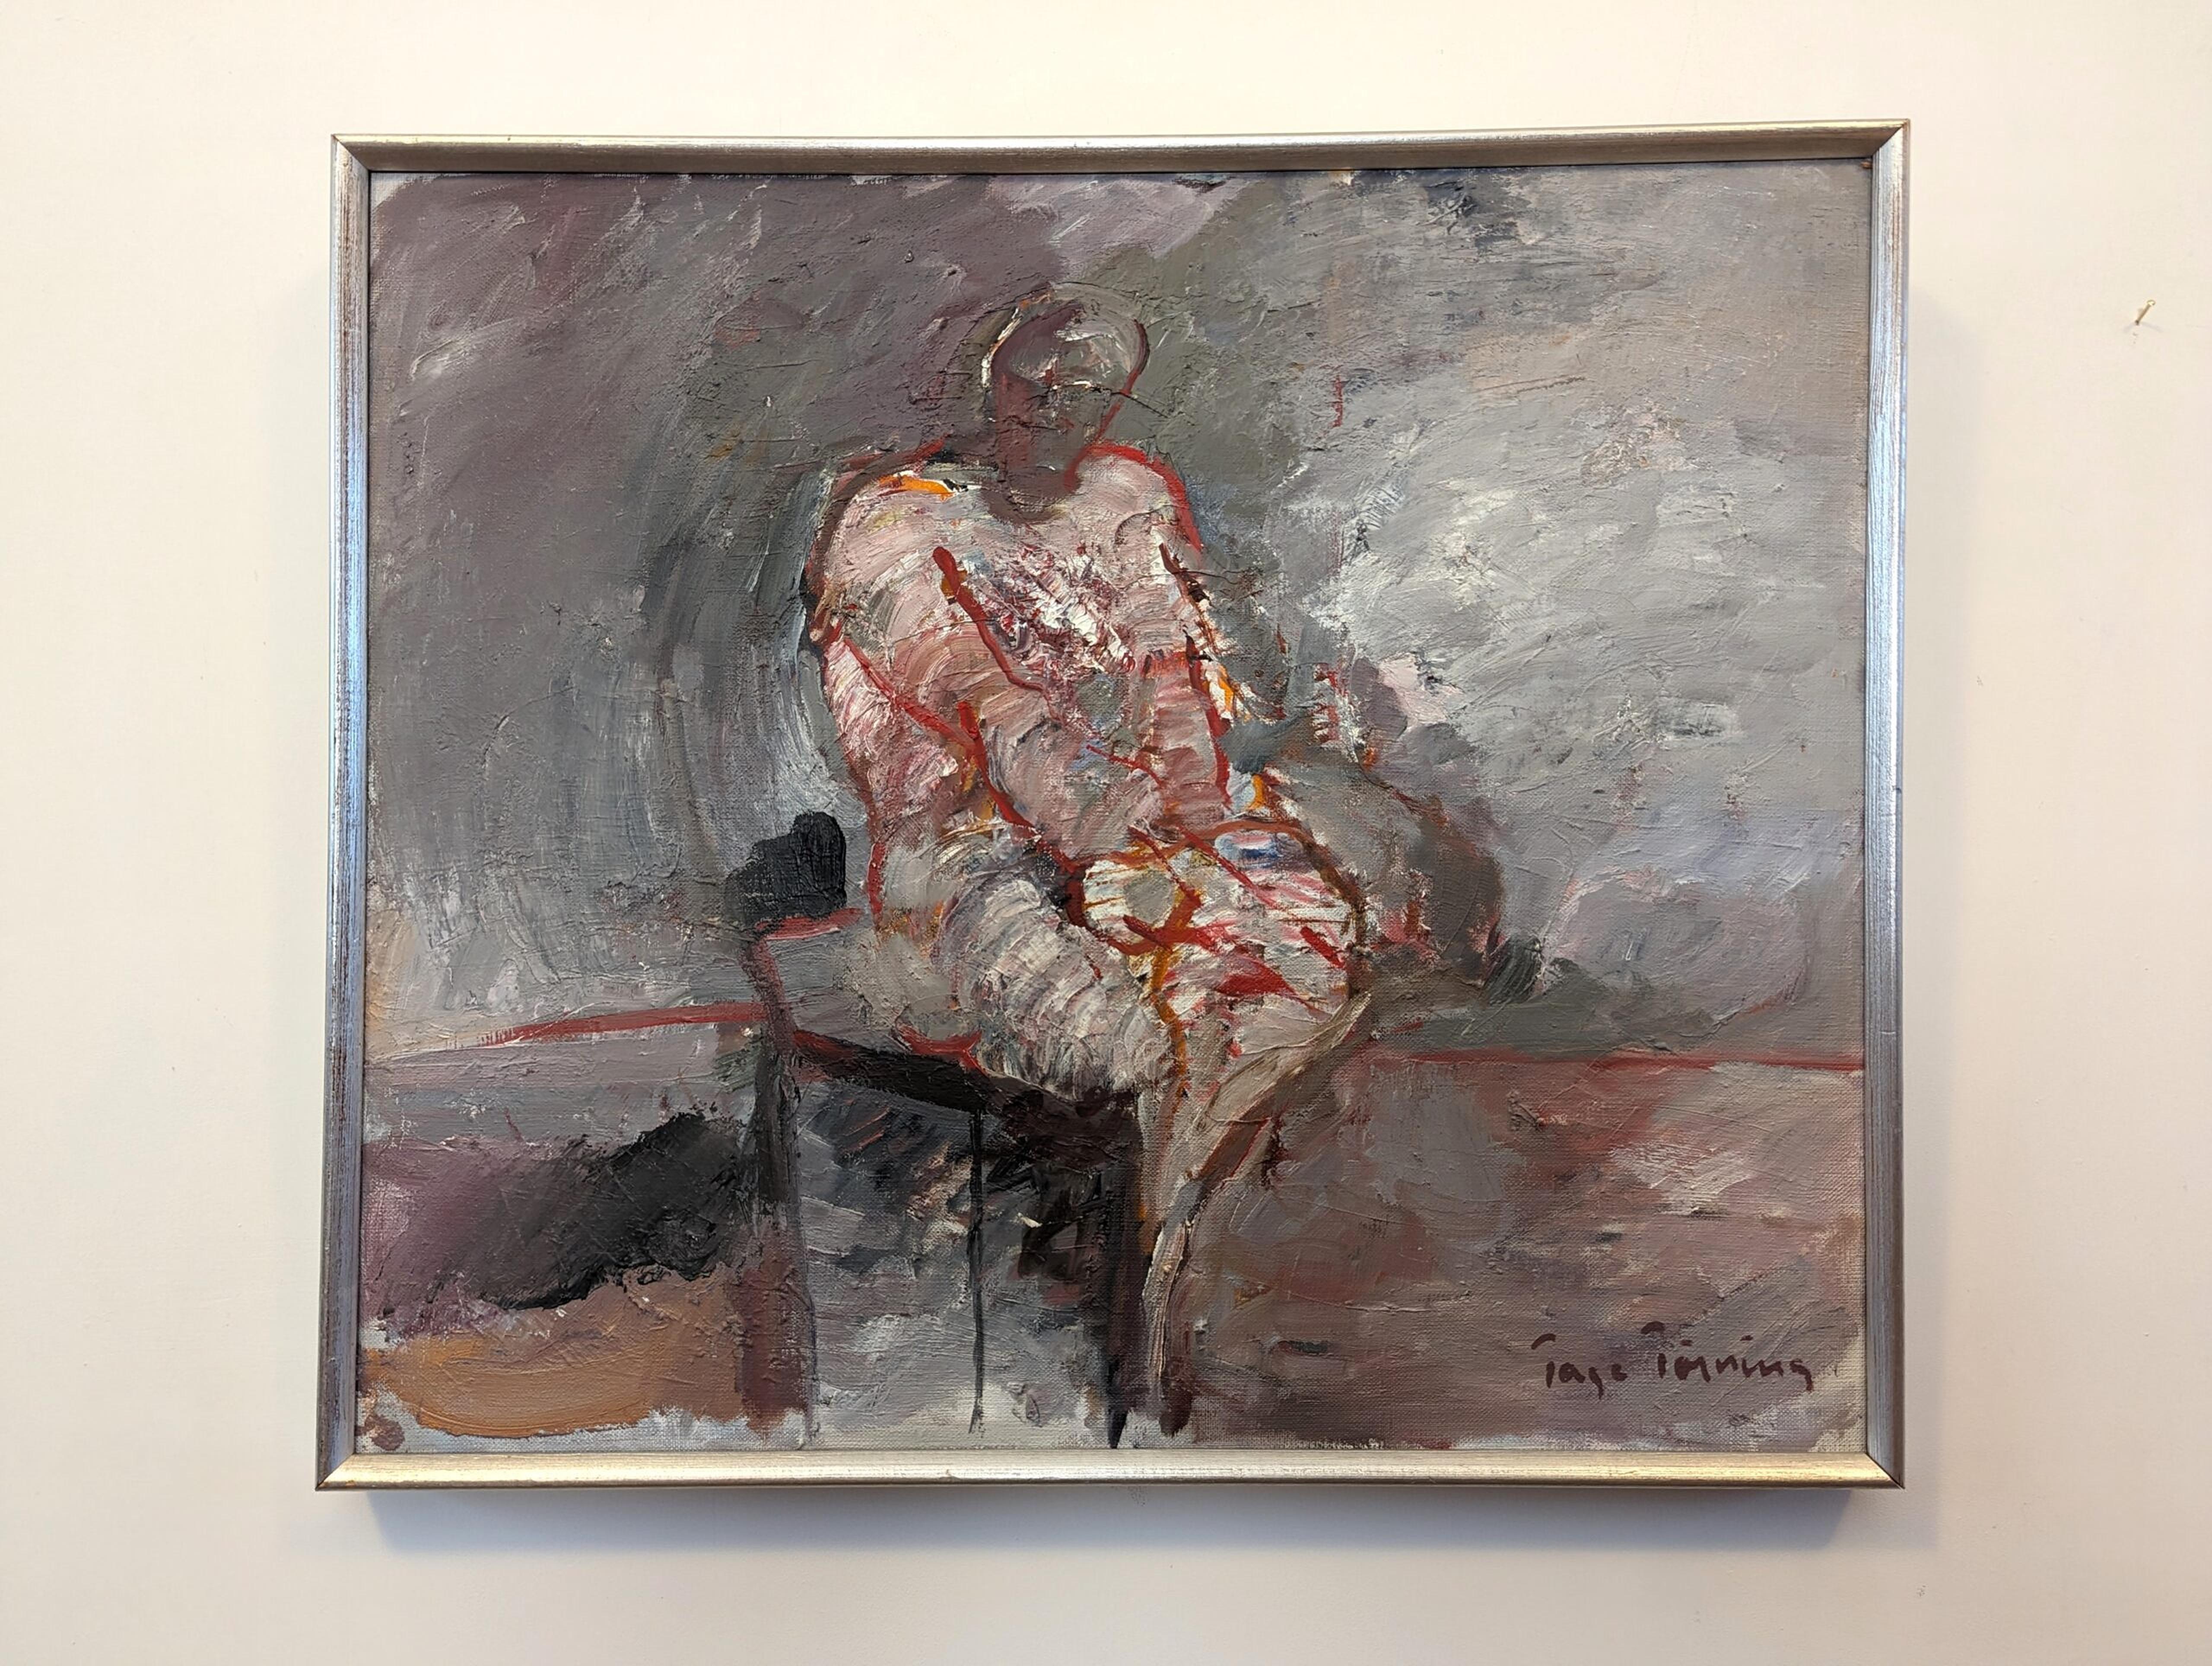 ENGIMA
Size: 49 x 57 cm (including frame)
Oil on canvas

An emotive and skillfully executed mid-century abstract figurative composition, painted in oil onto canvas.

The piece features a figure seated on a chair, its form abstracted. Striking in its